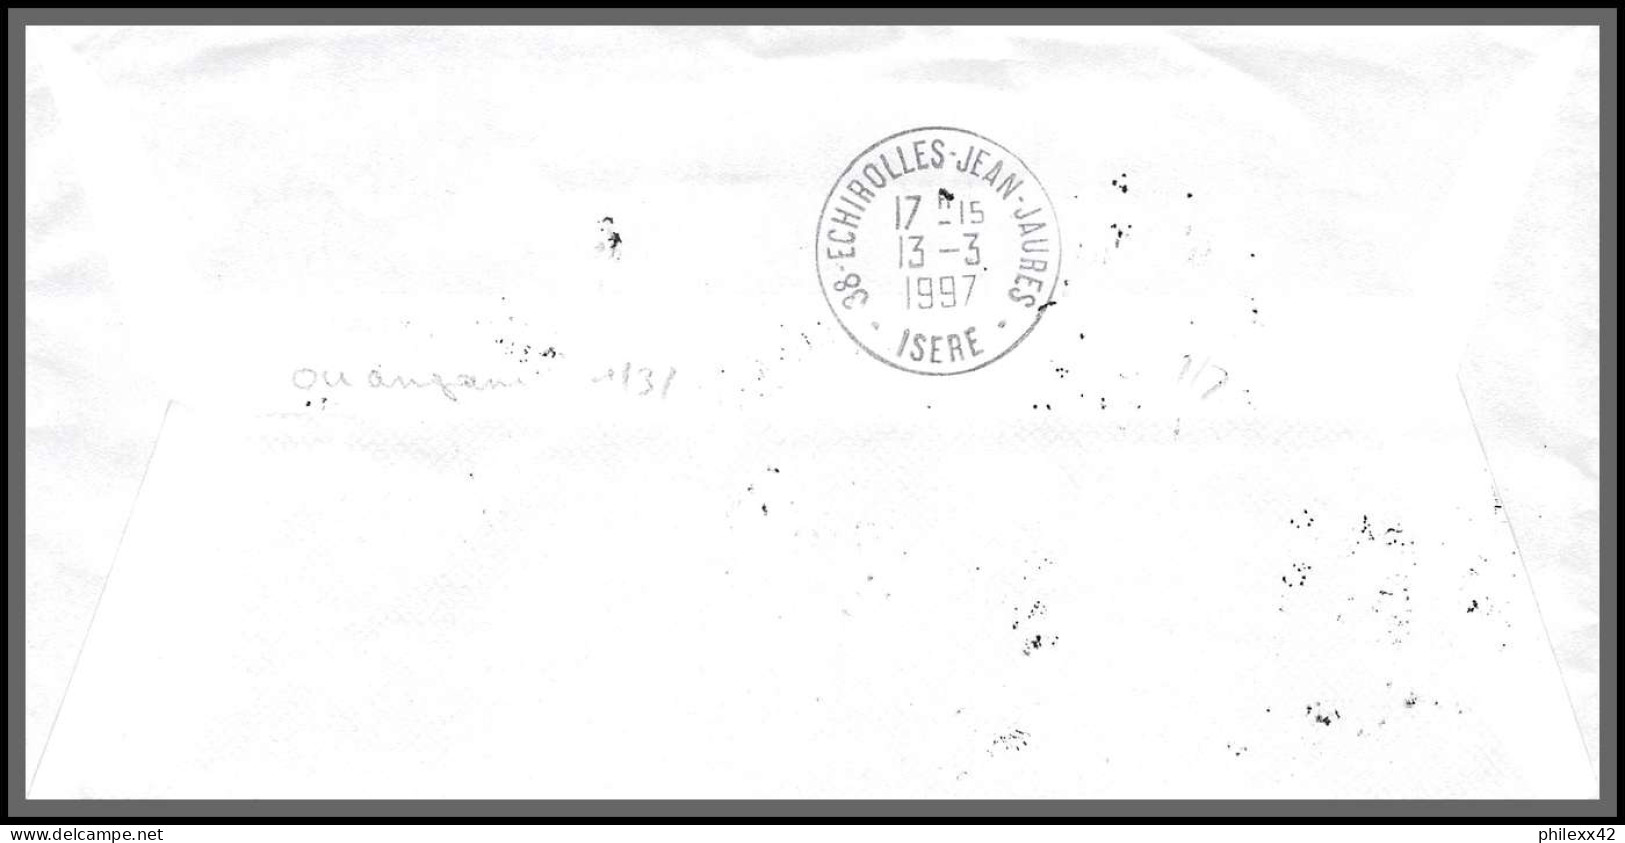 74043 Mixte Atm Marianne Bicentenaire 10/3/1997 Ouangani Mayotte Echirolles Isère Lettre Cover Colonies  - Covers & Documents